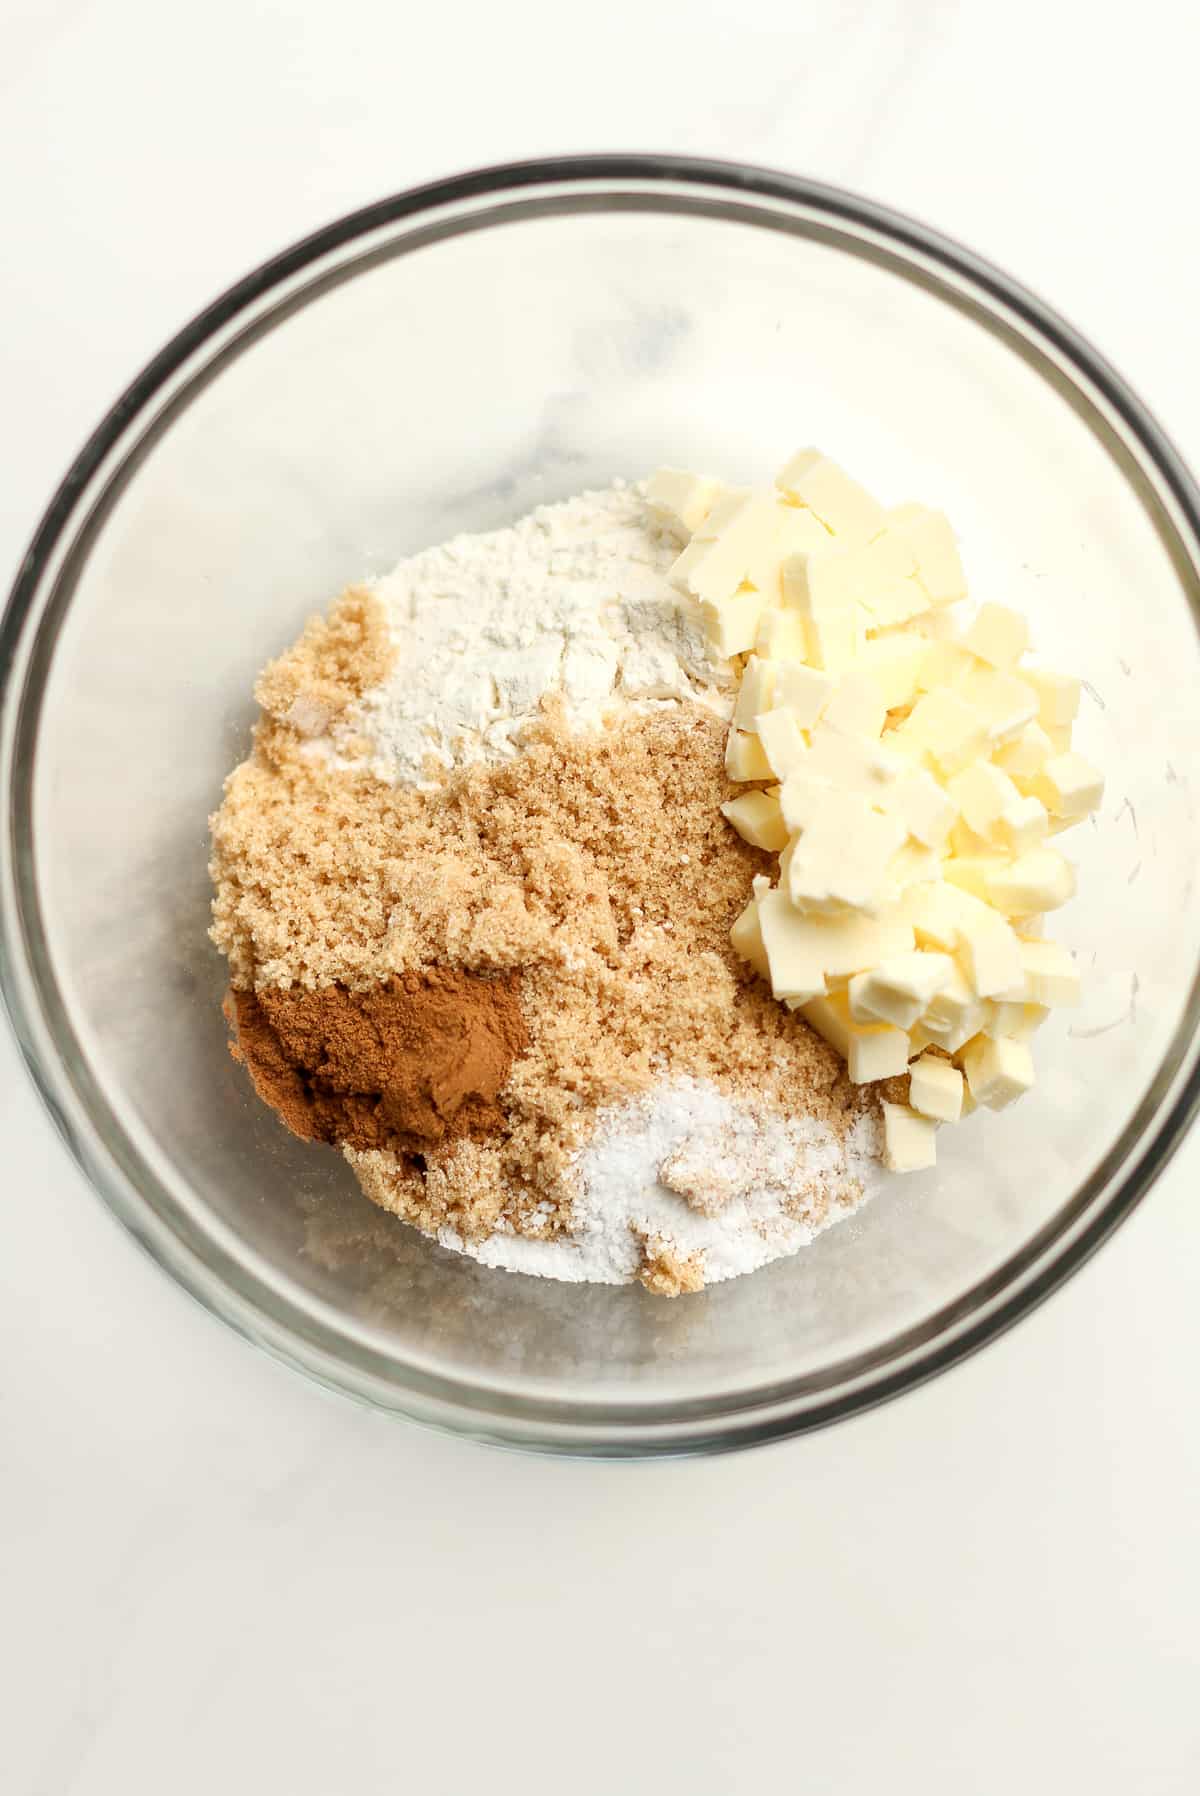 A bowl of the streusel topping ingredients.